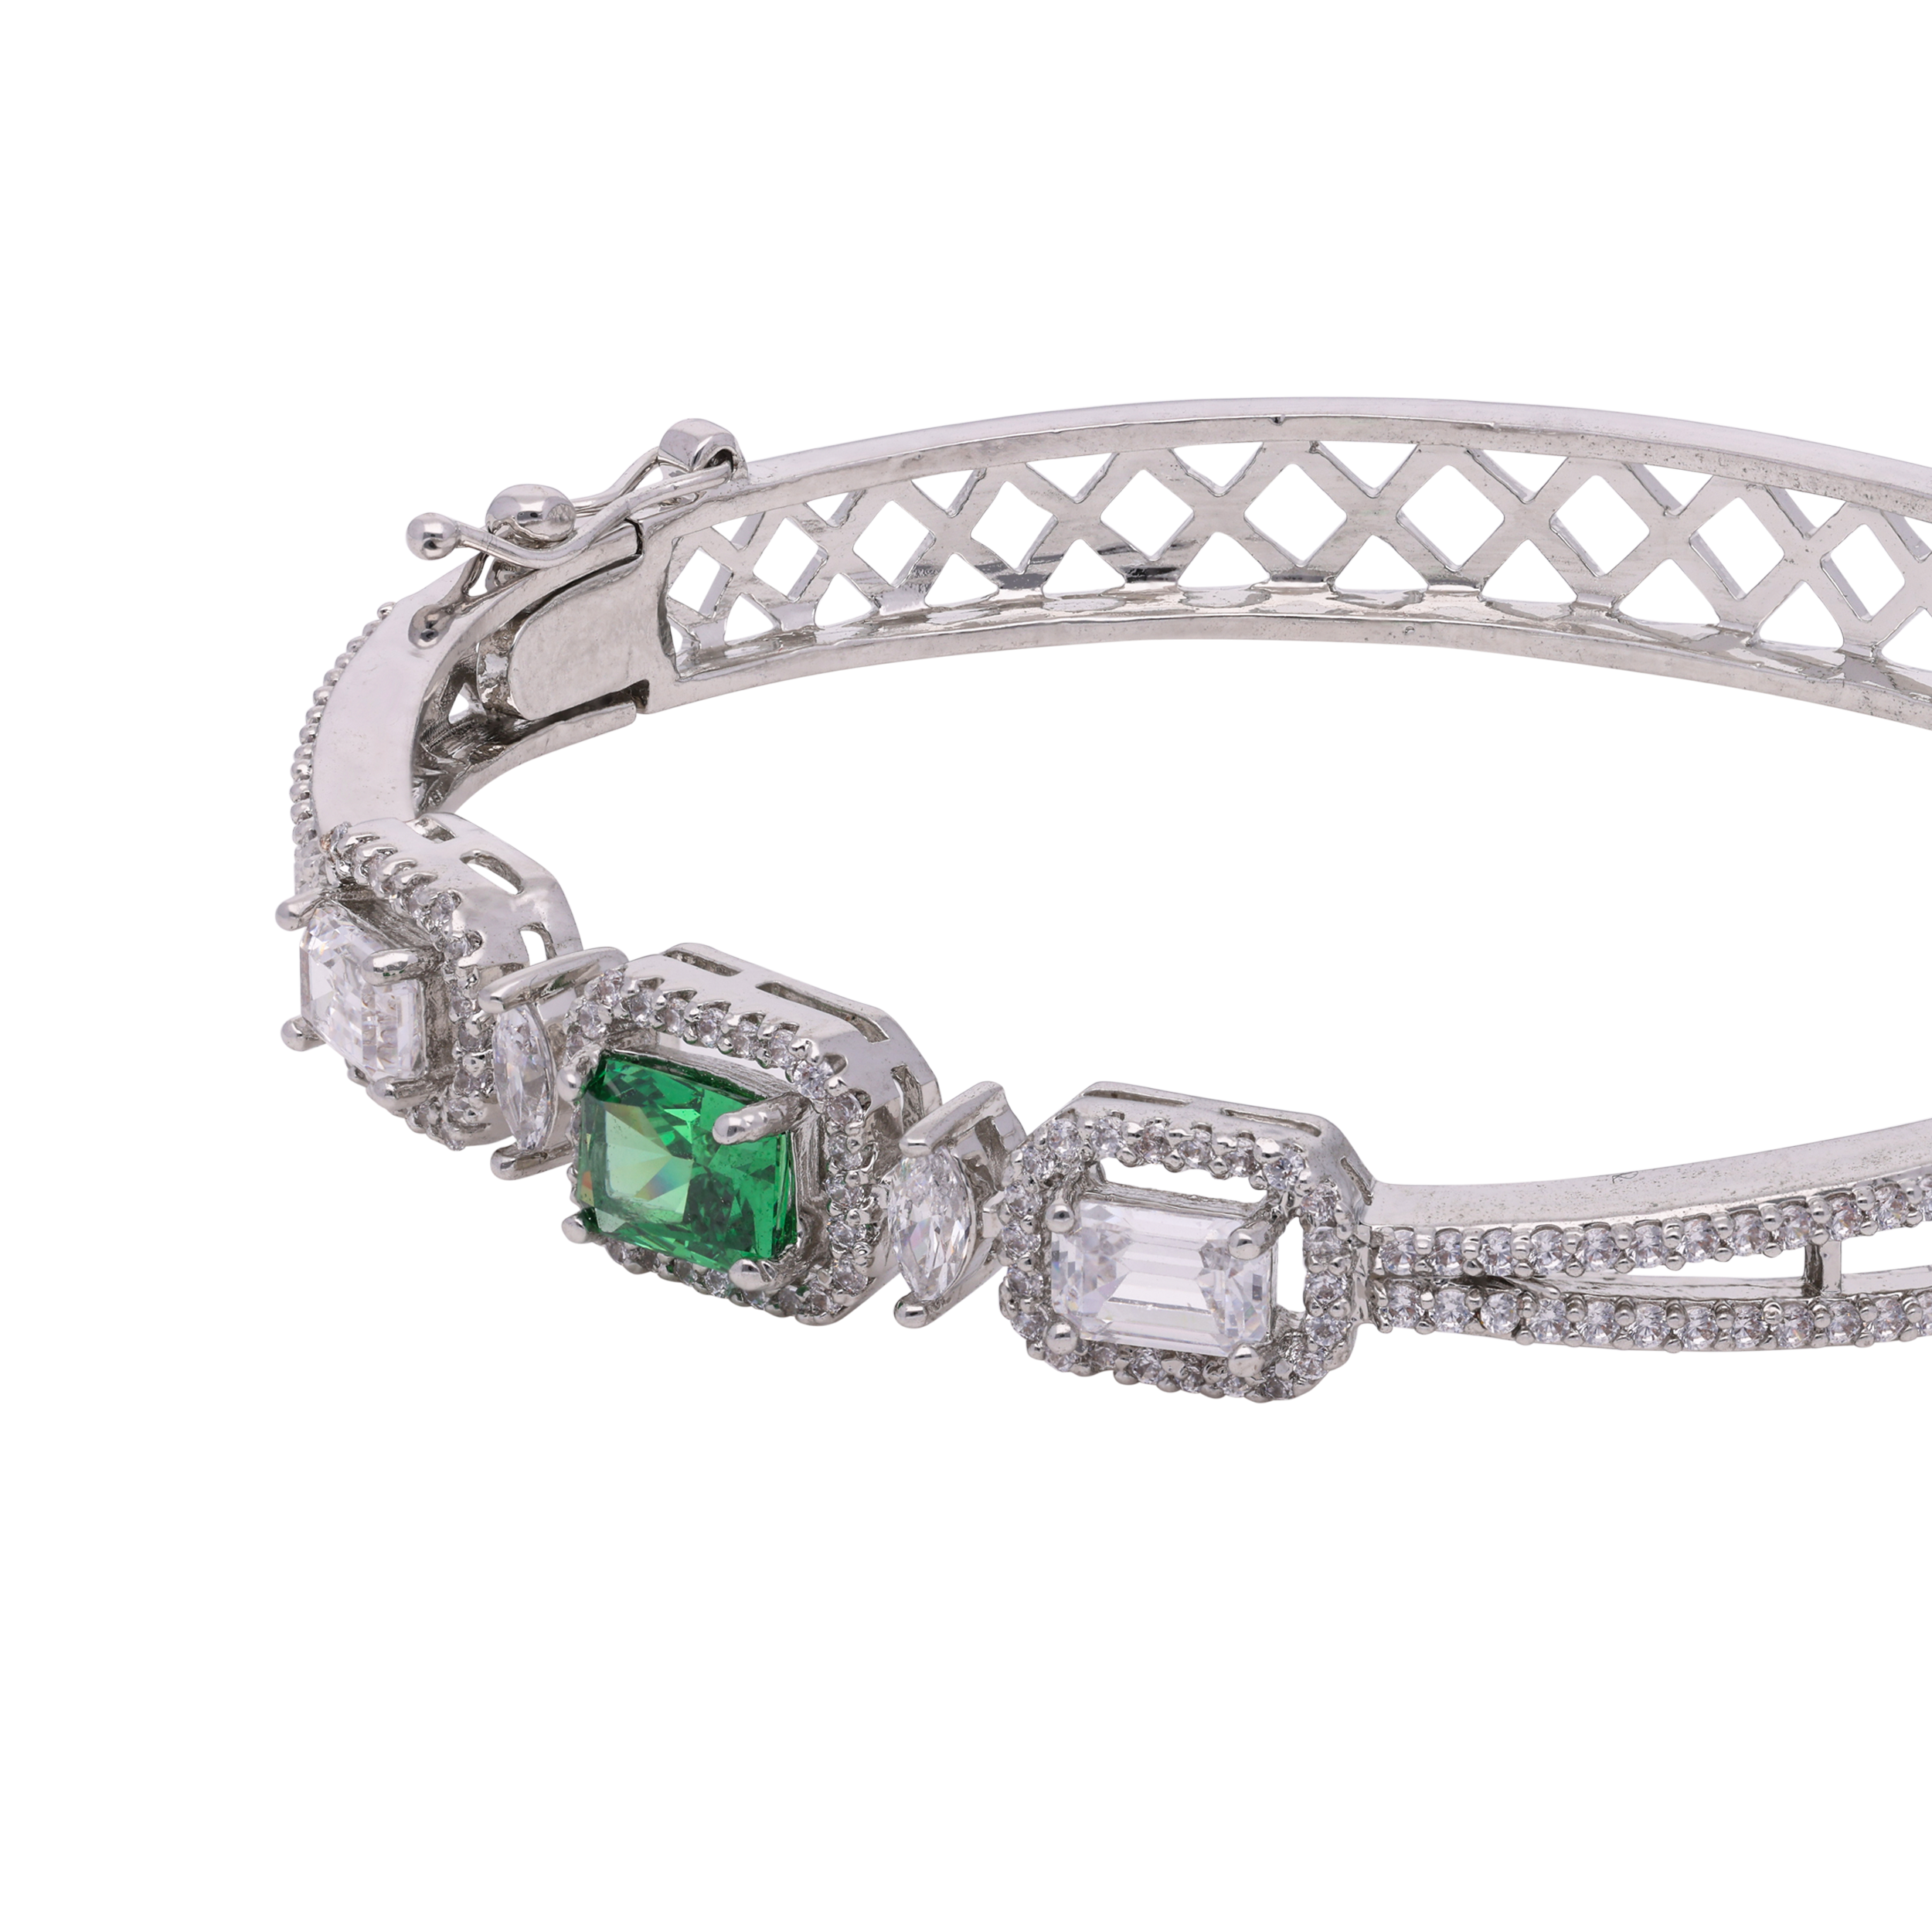 Sterling Silver Openable Stiff Bracelet with Fancy Shaped Solitaire Cubic Zirconia and Single Green Gem | SKU : 0020291488